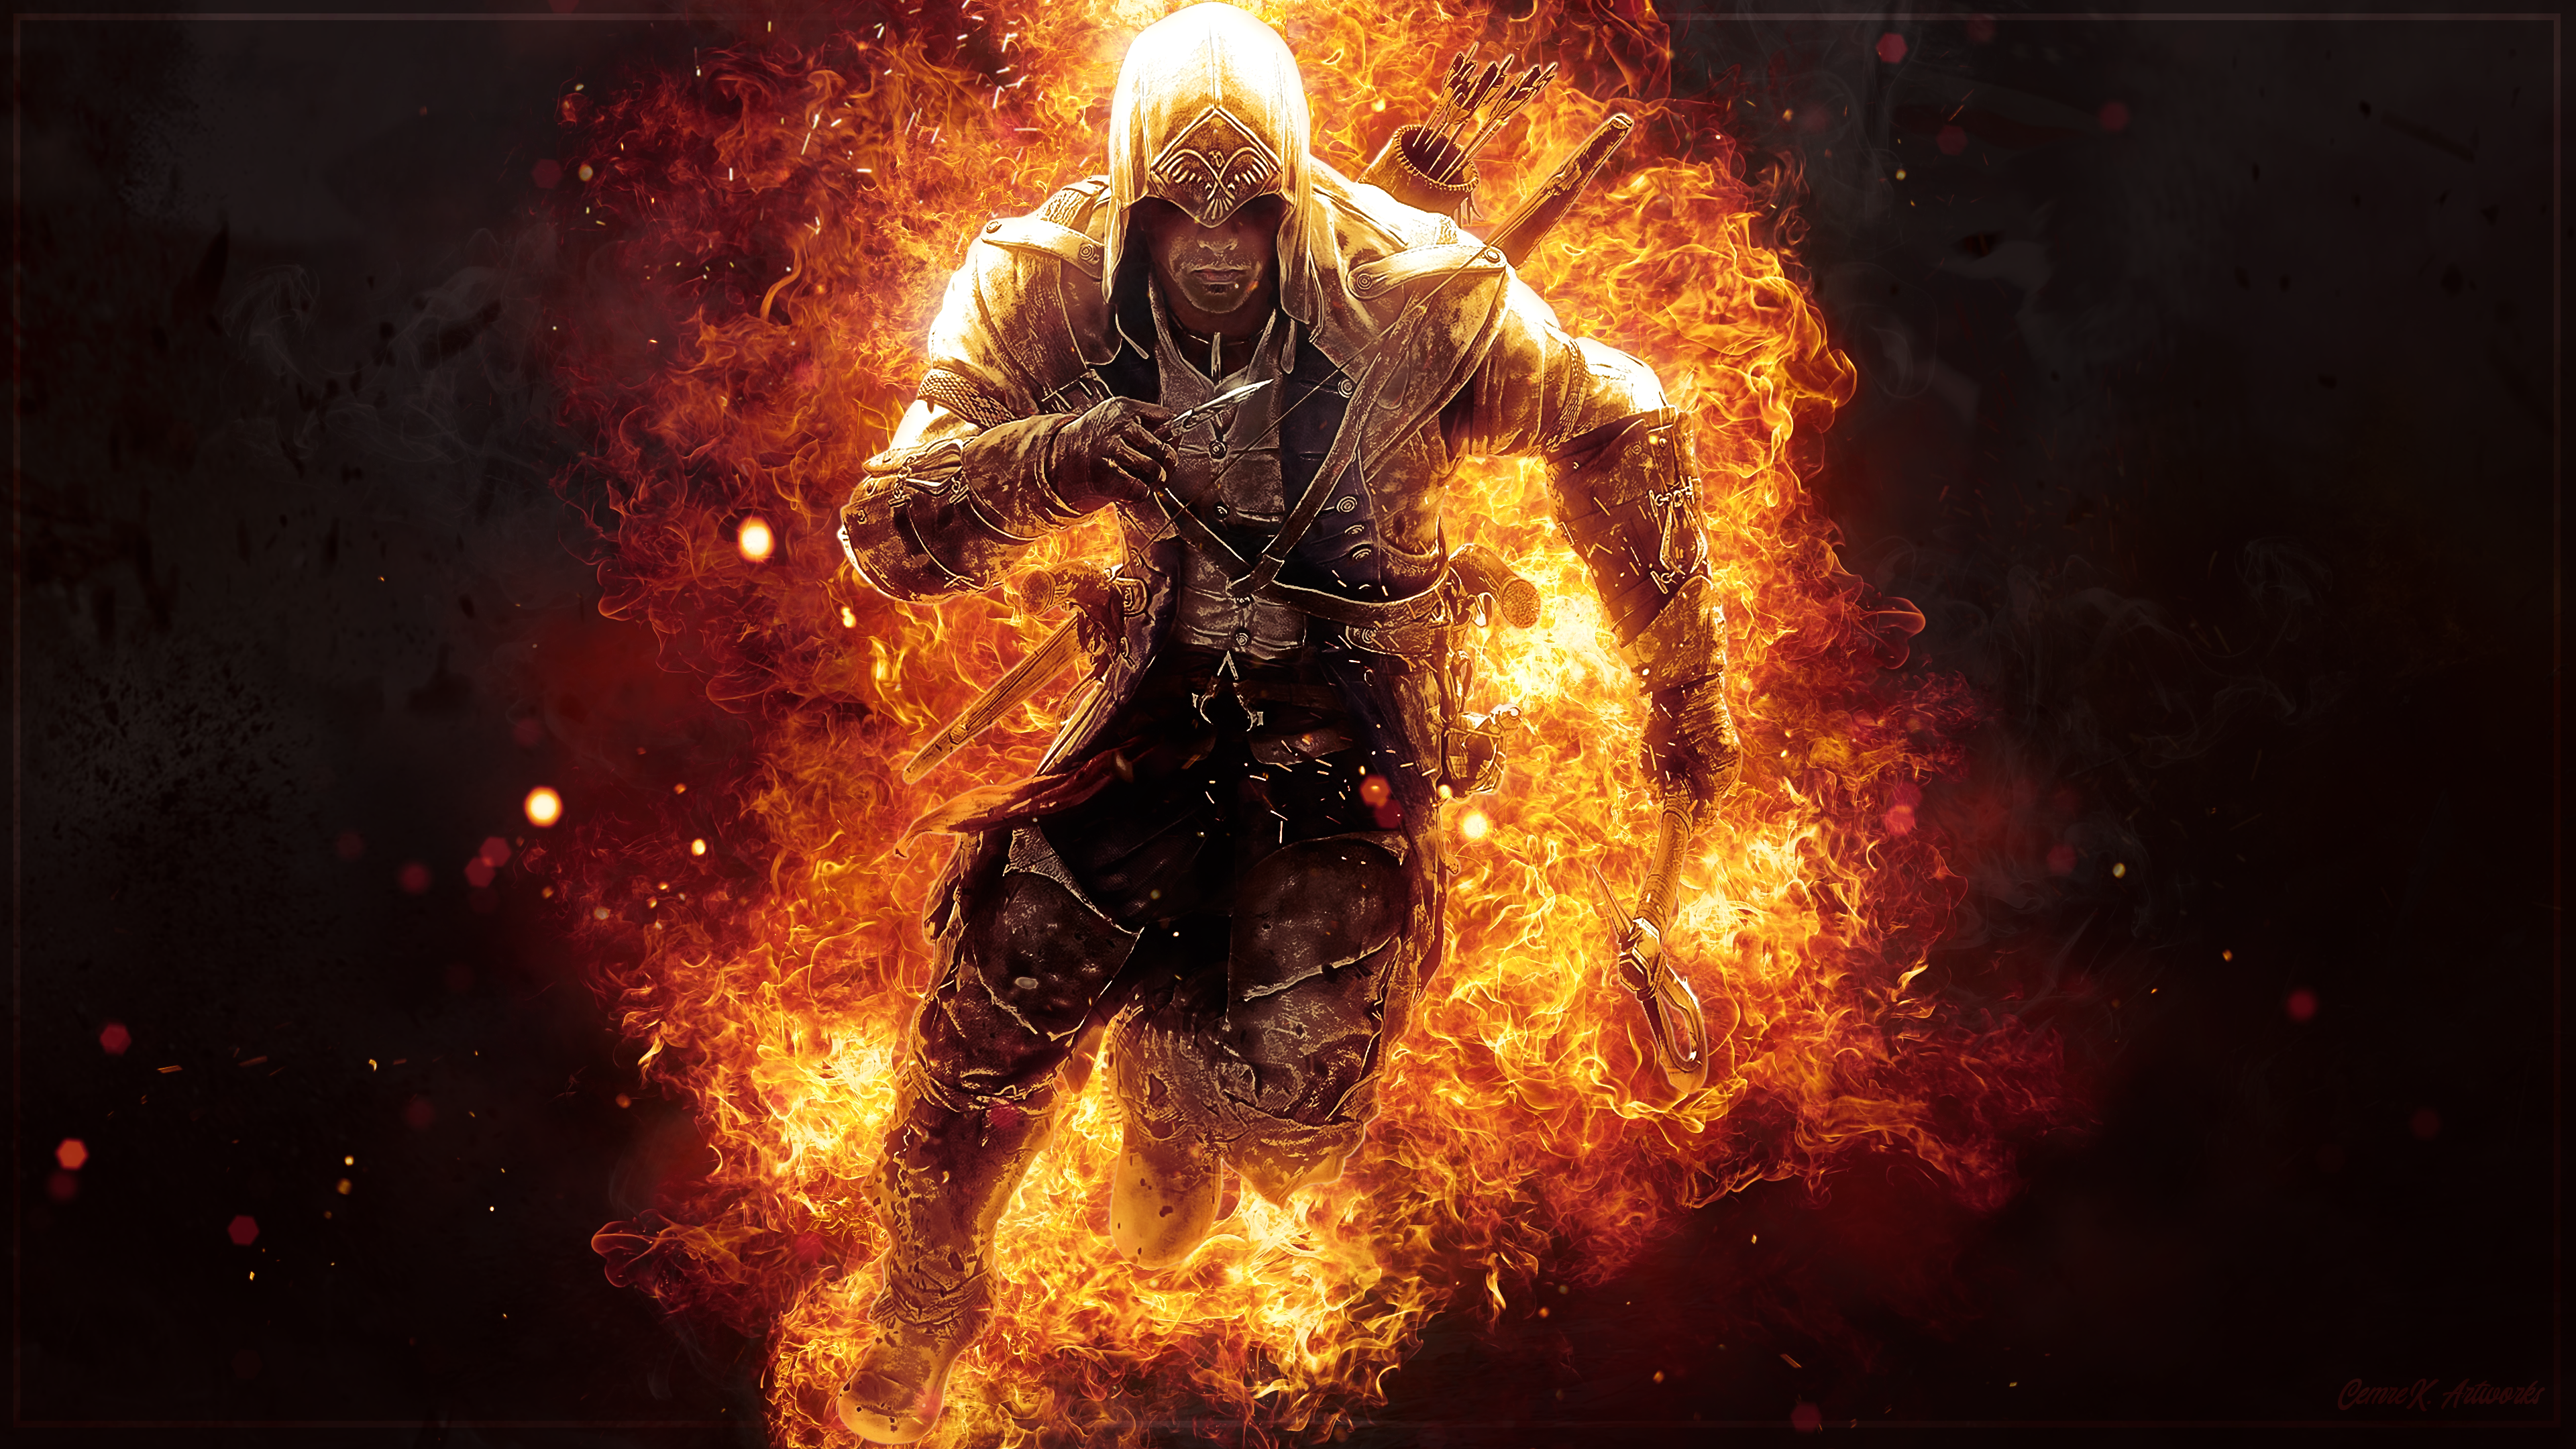 General 3840x2160 Assassin's Creed fire video games Assassin's Creed III video game art video game characters Ubisoft